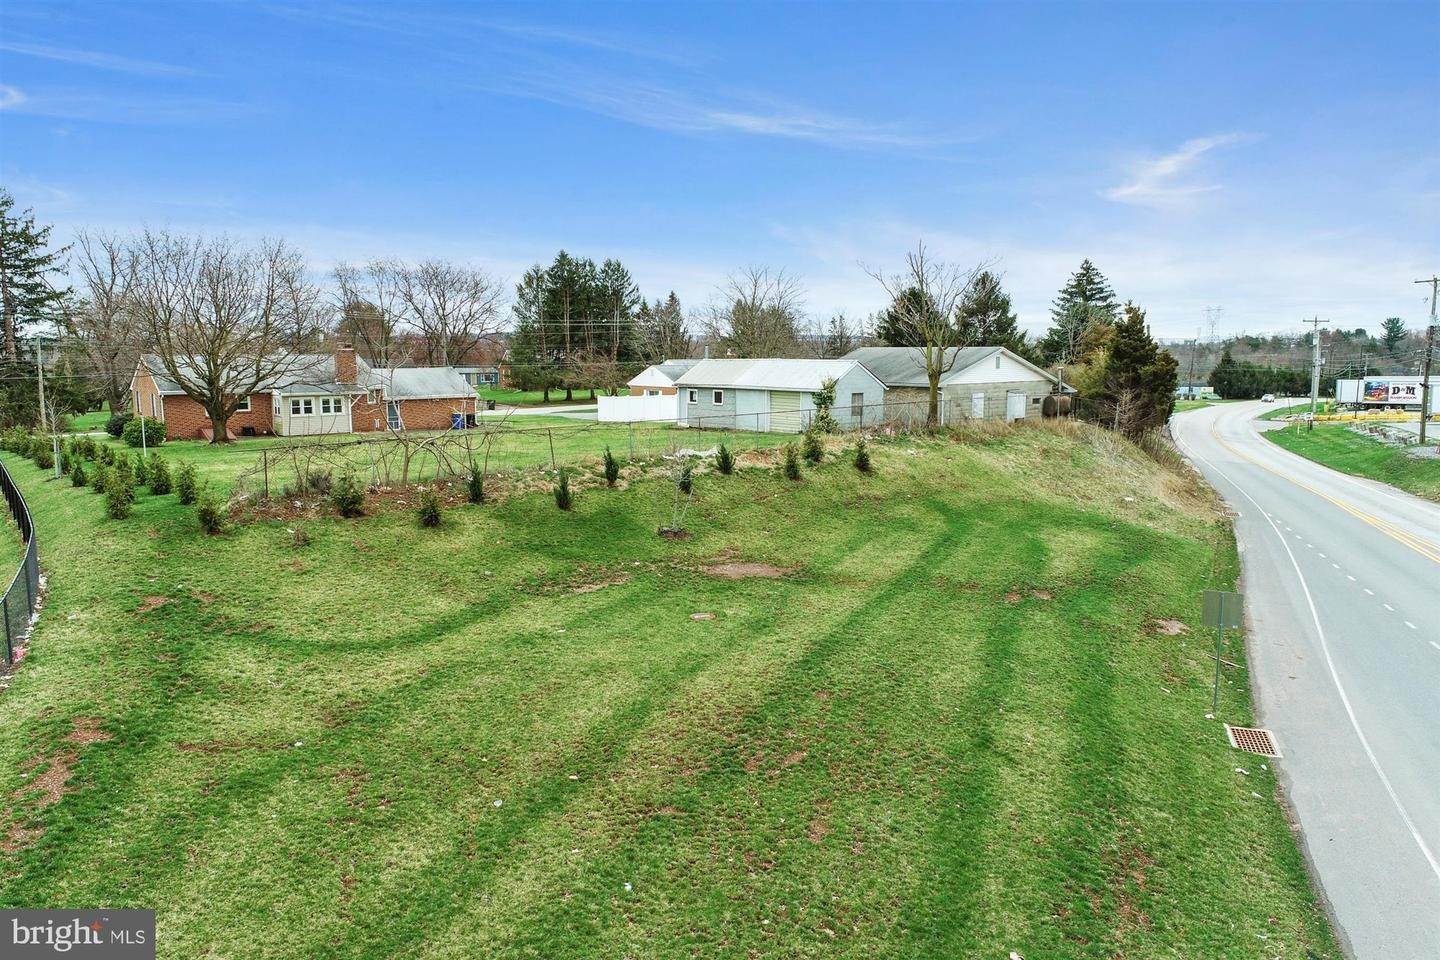 17. Commercial for Sale at 10 CLOVERLEAF Road York, Pennsylvania 17406 United States